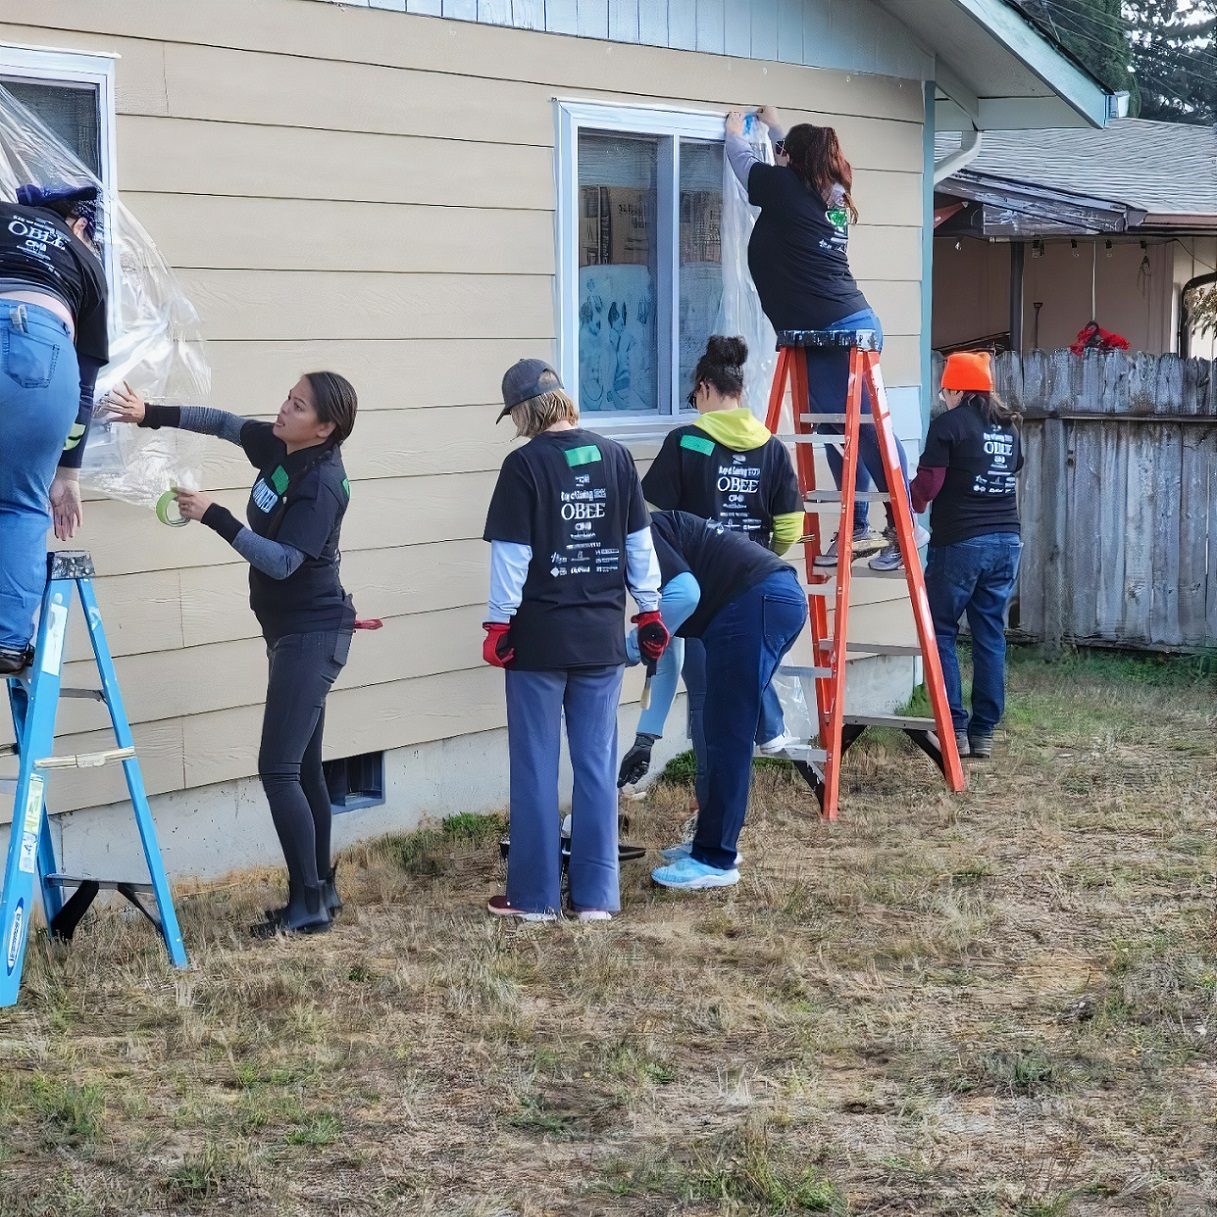 group of people in black tshirts prep the outside of a house for painting. Two are on ladders tapping plastic coverings on windows